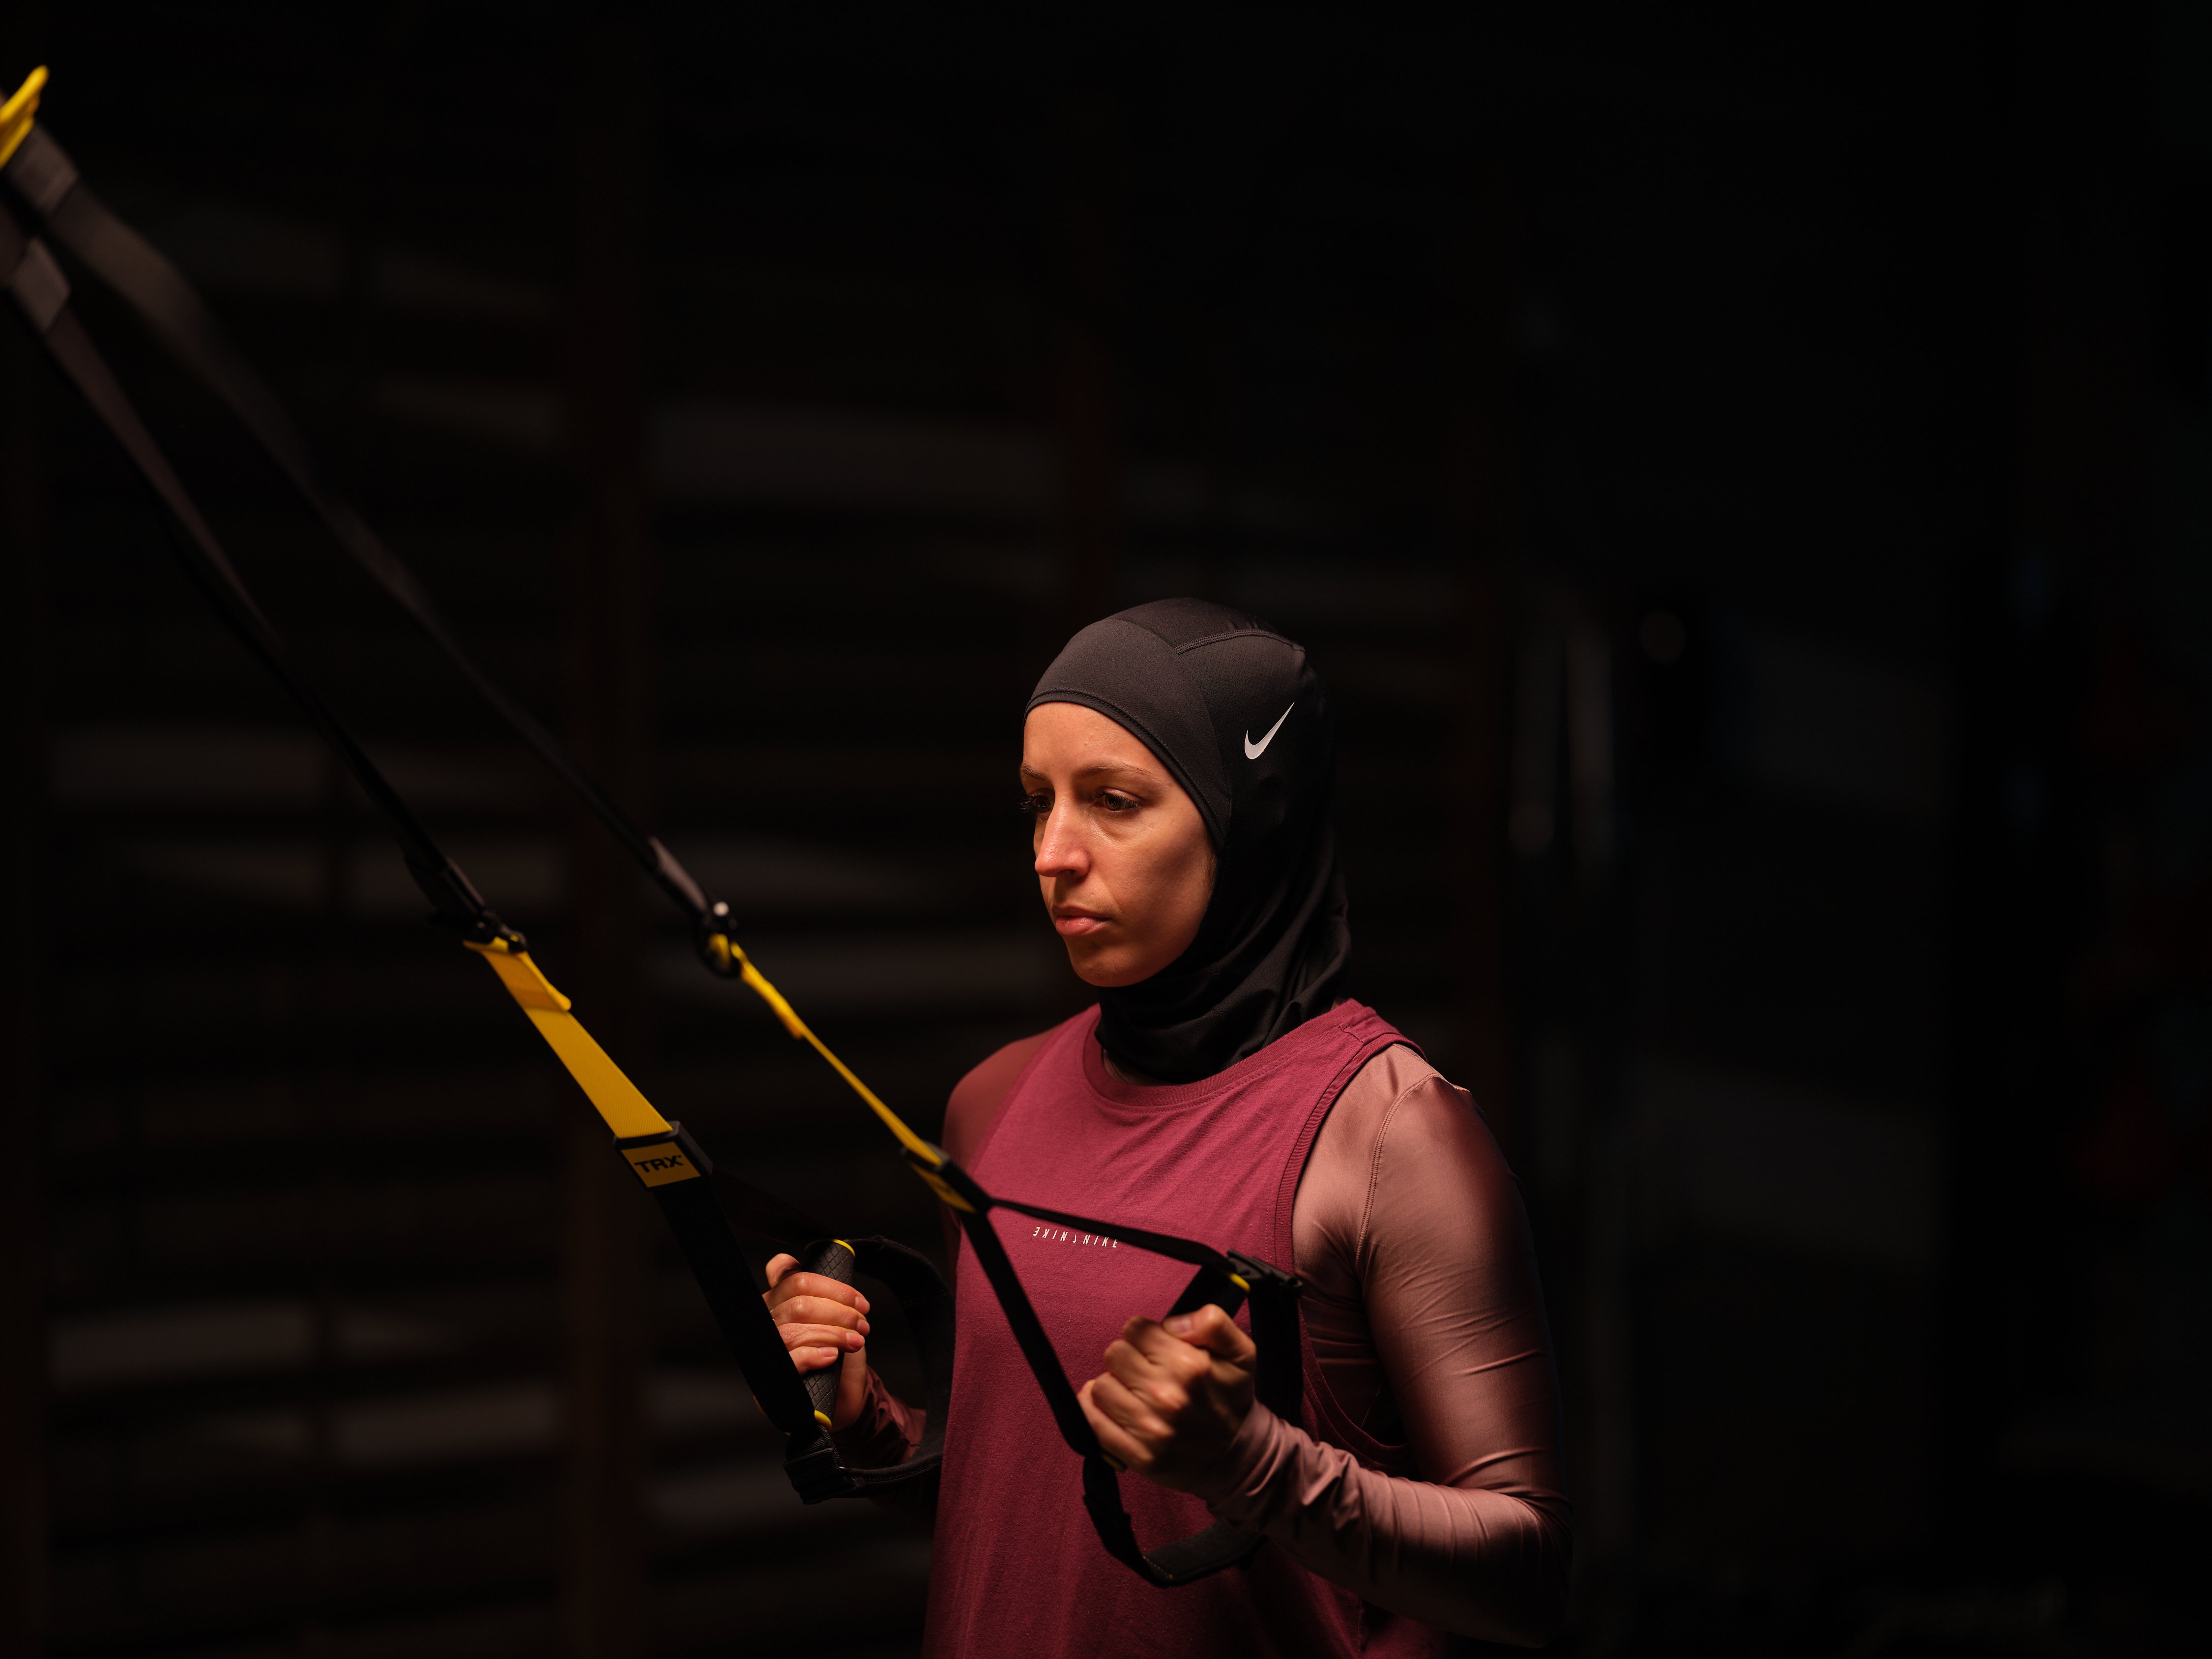 Nesrine Dally using the TRX Suspension Trainer for a TRX Row. She wears a black hijab, pink longsleeve shirt, and dark rose vest.